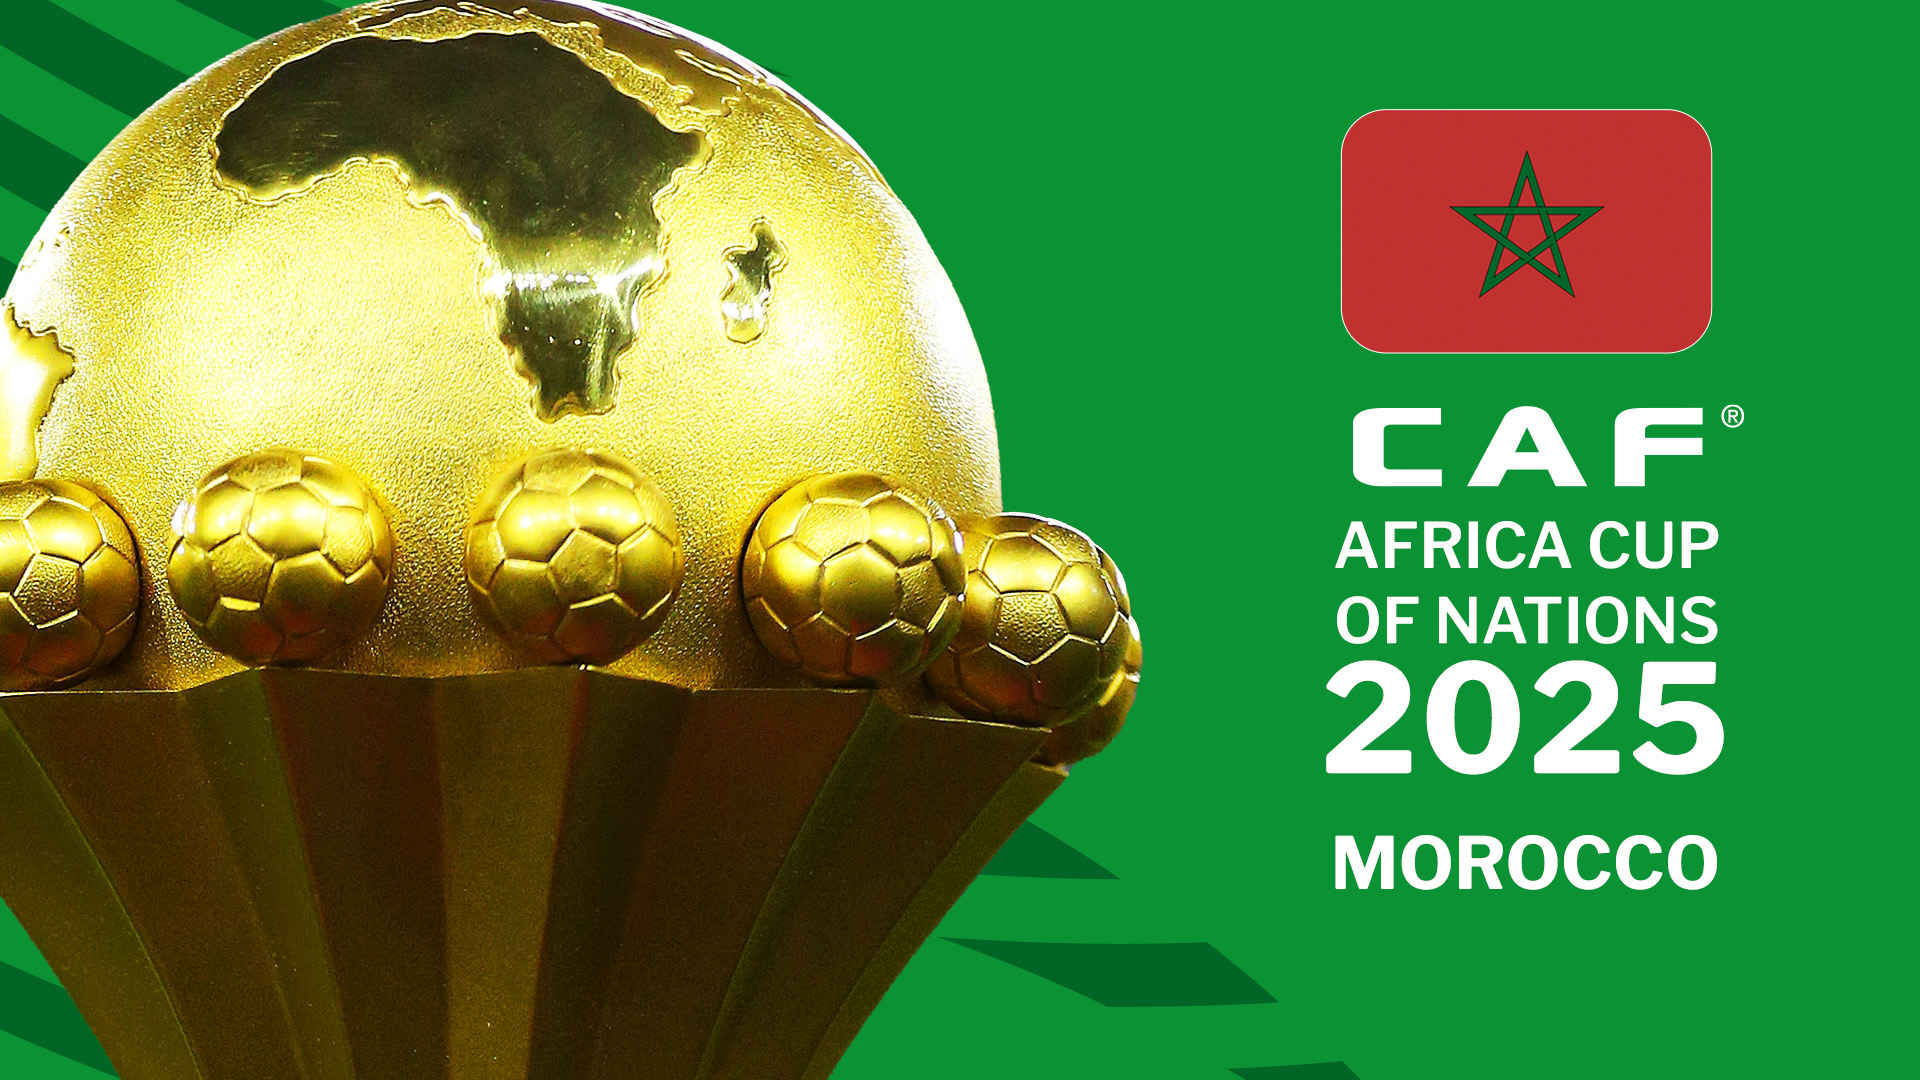 Morocco to Host 2025 Africa Cup of Nations